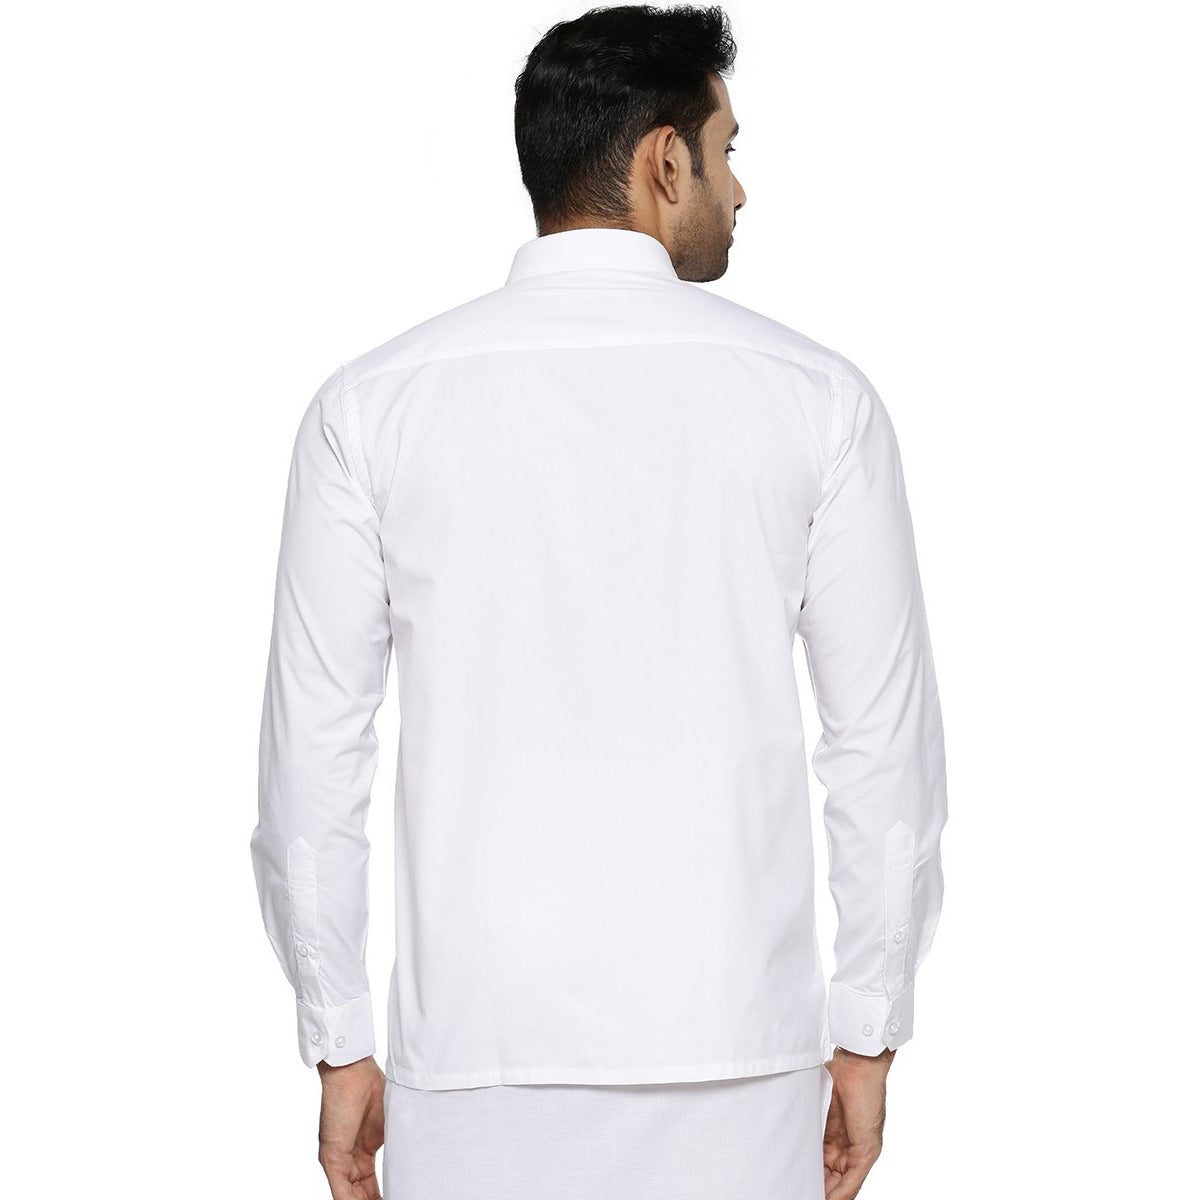 Mens Cotton White Shirt Full Sleeves Plus Size Soft Touch-Back view